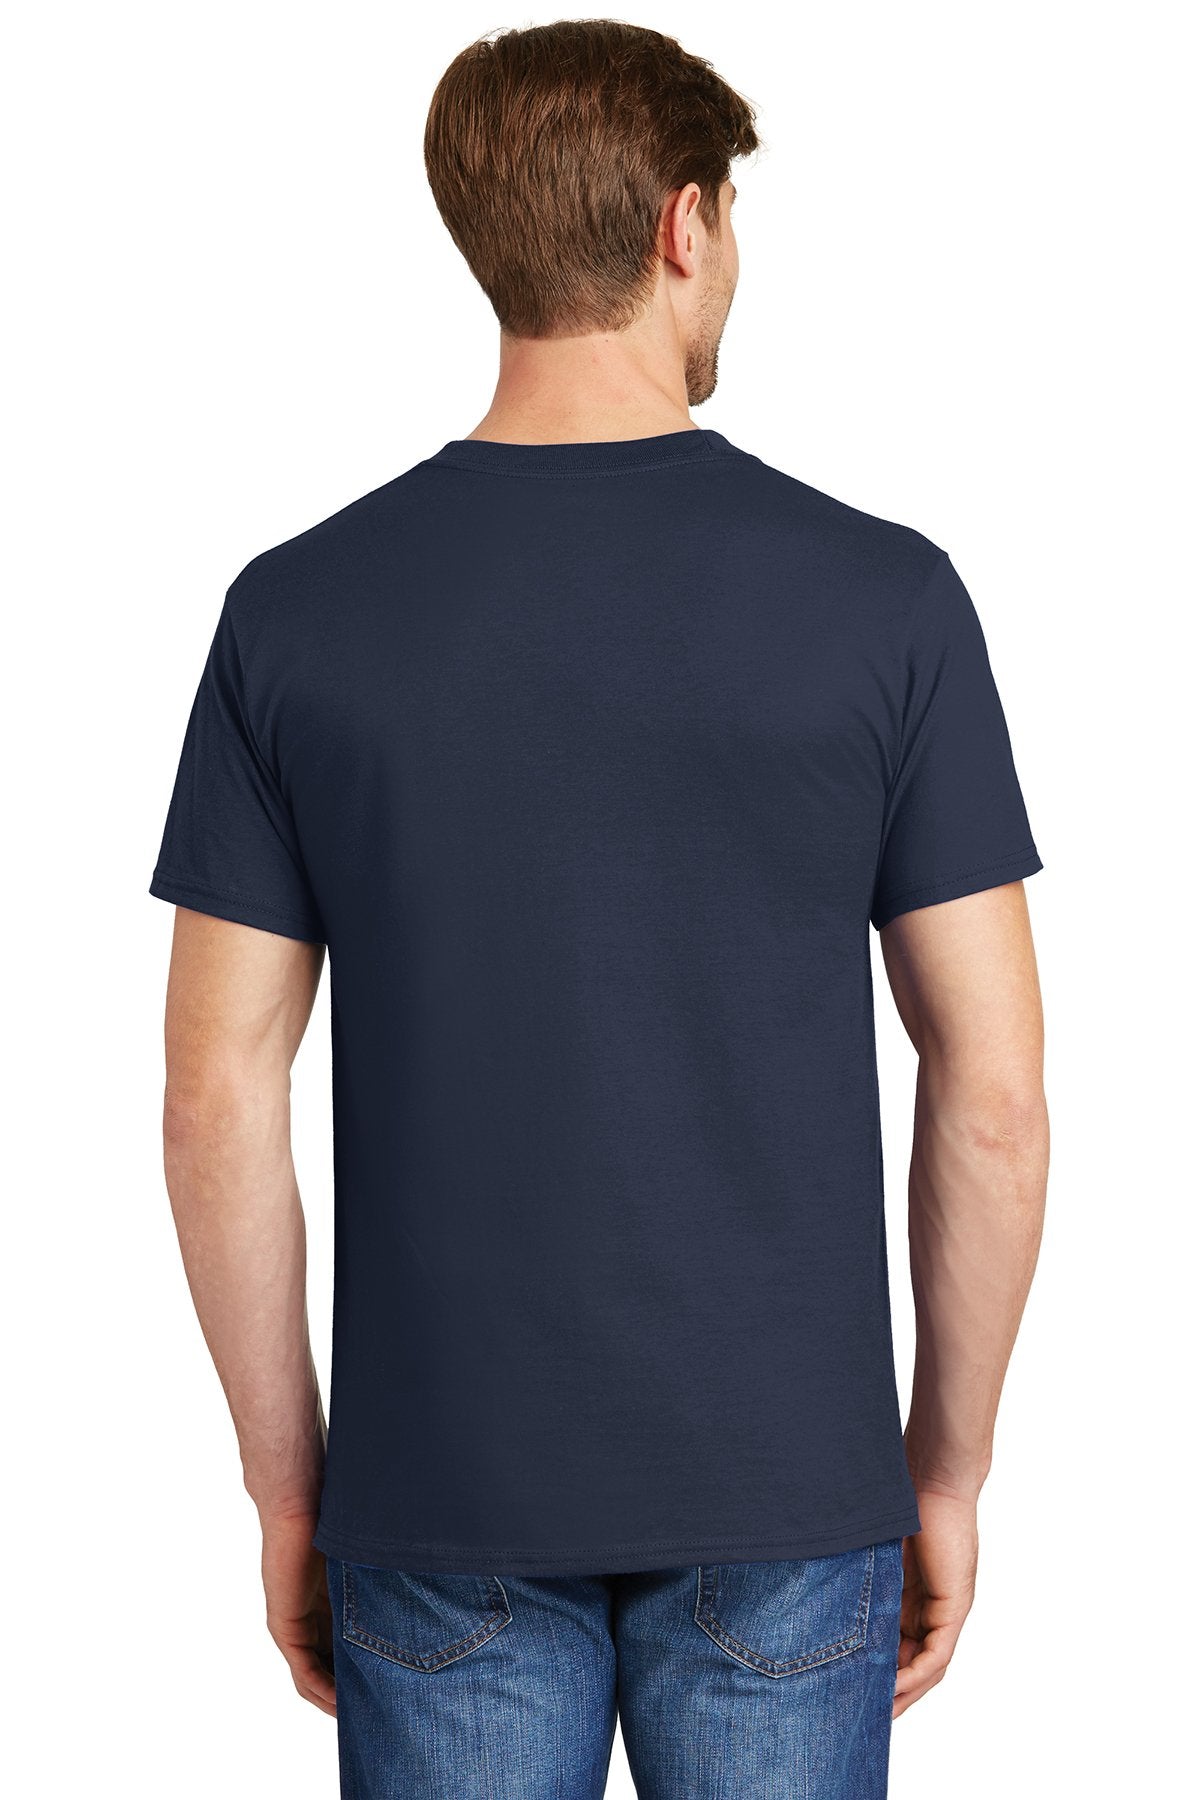 hanes beefy cotton t shirt with pocket 5190 navy